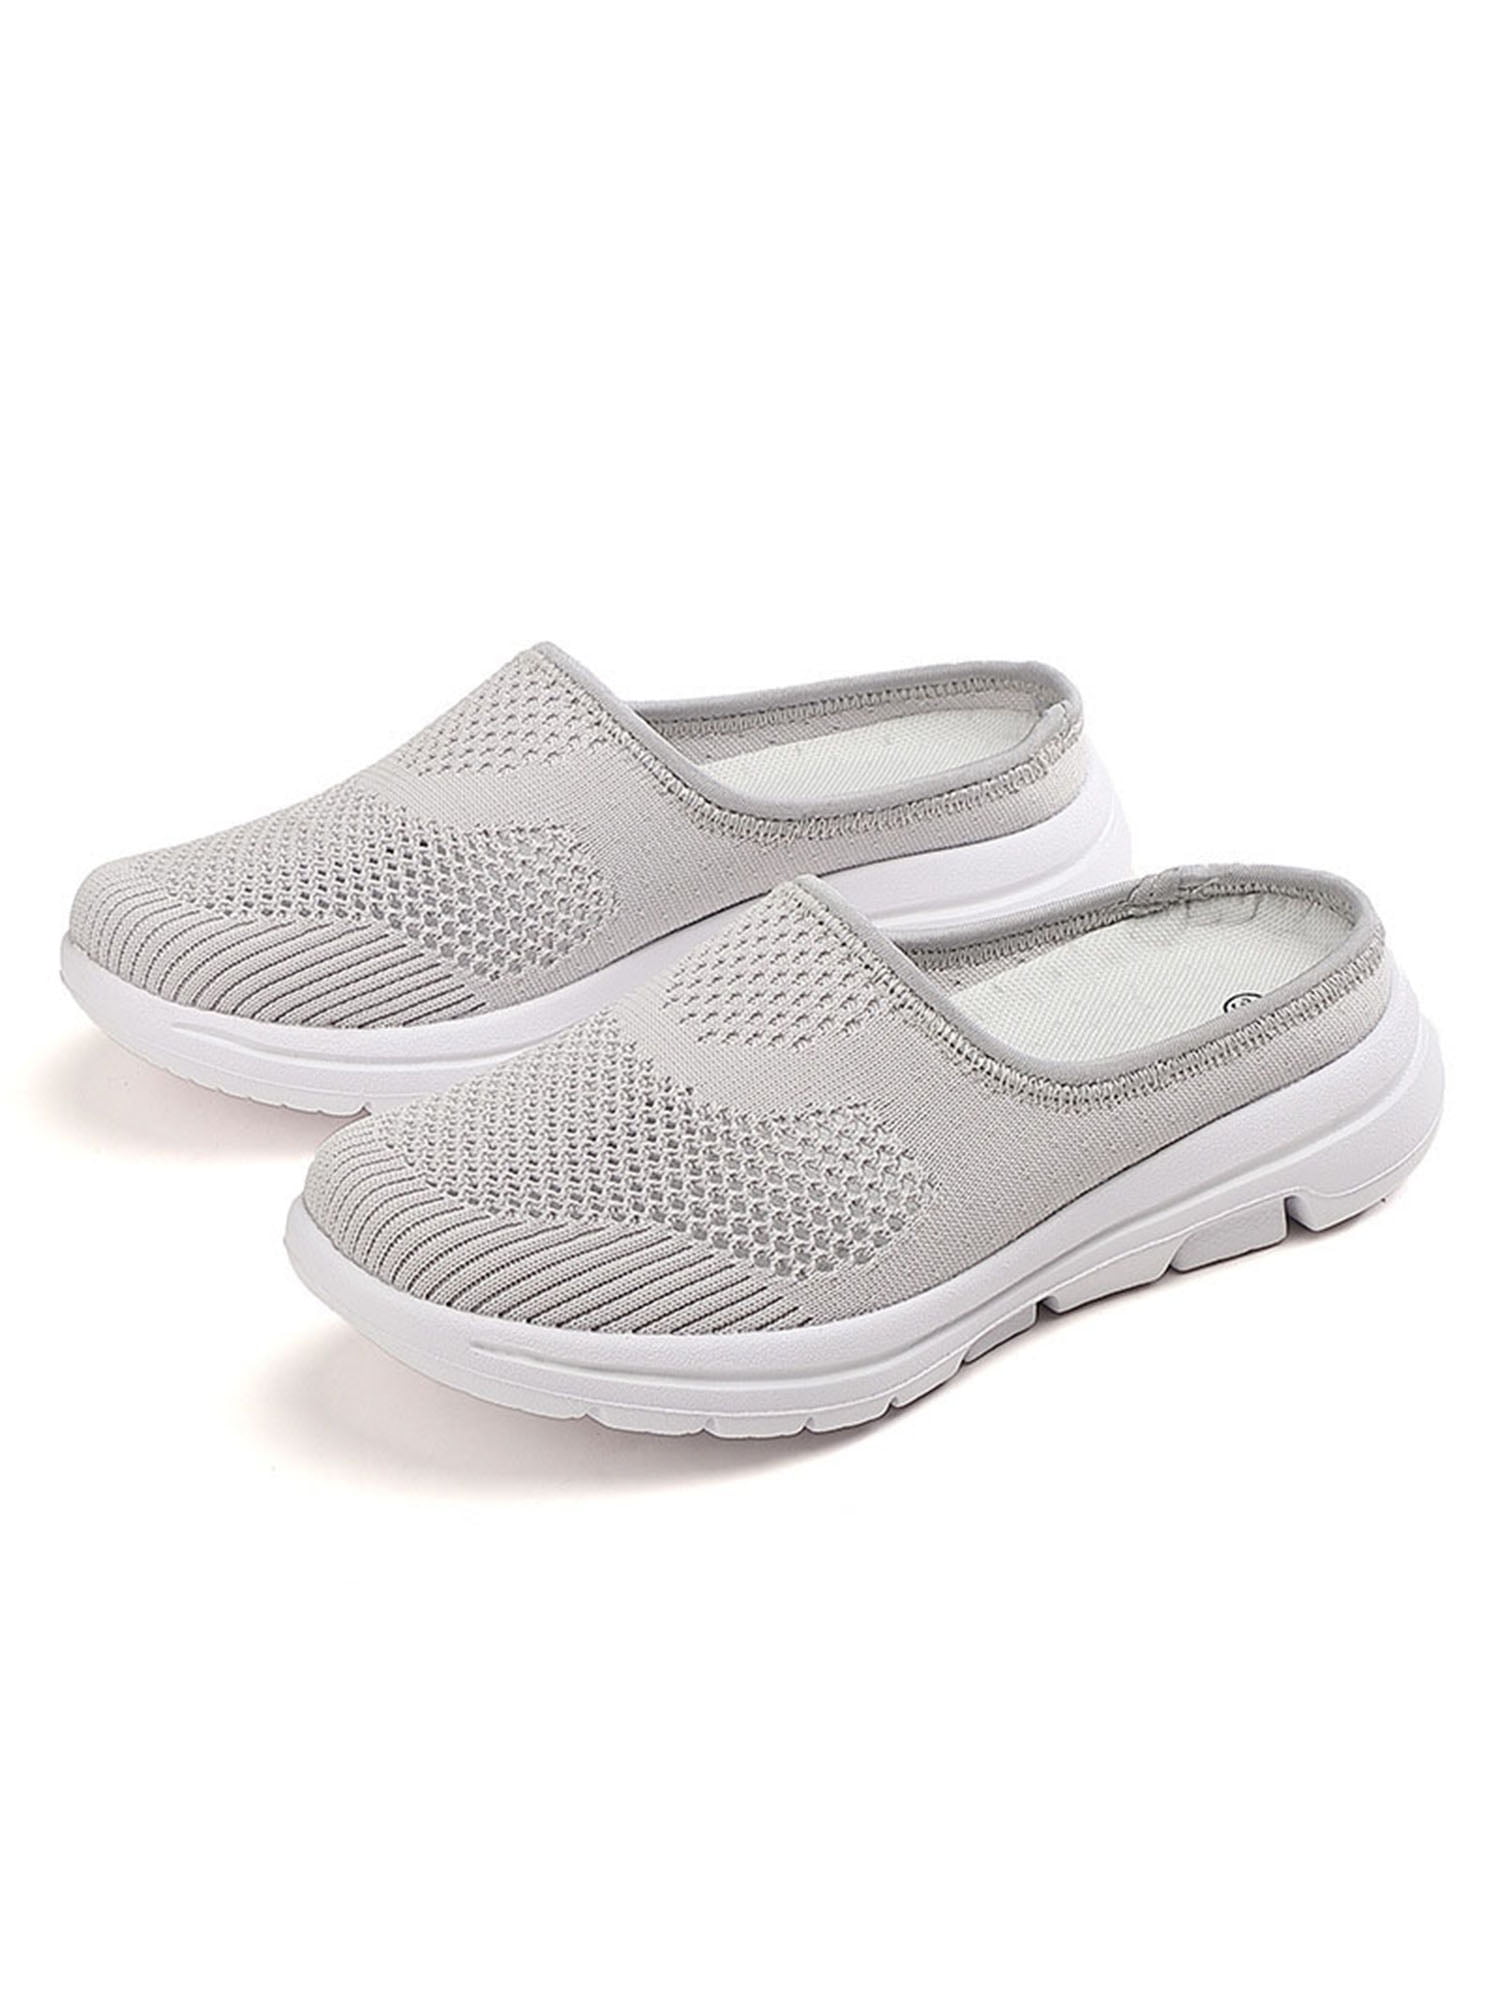 Womens Canvas Platform Shoes Slip On Mules Slippers Low Top Backless Sneakers for Walking